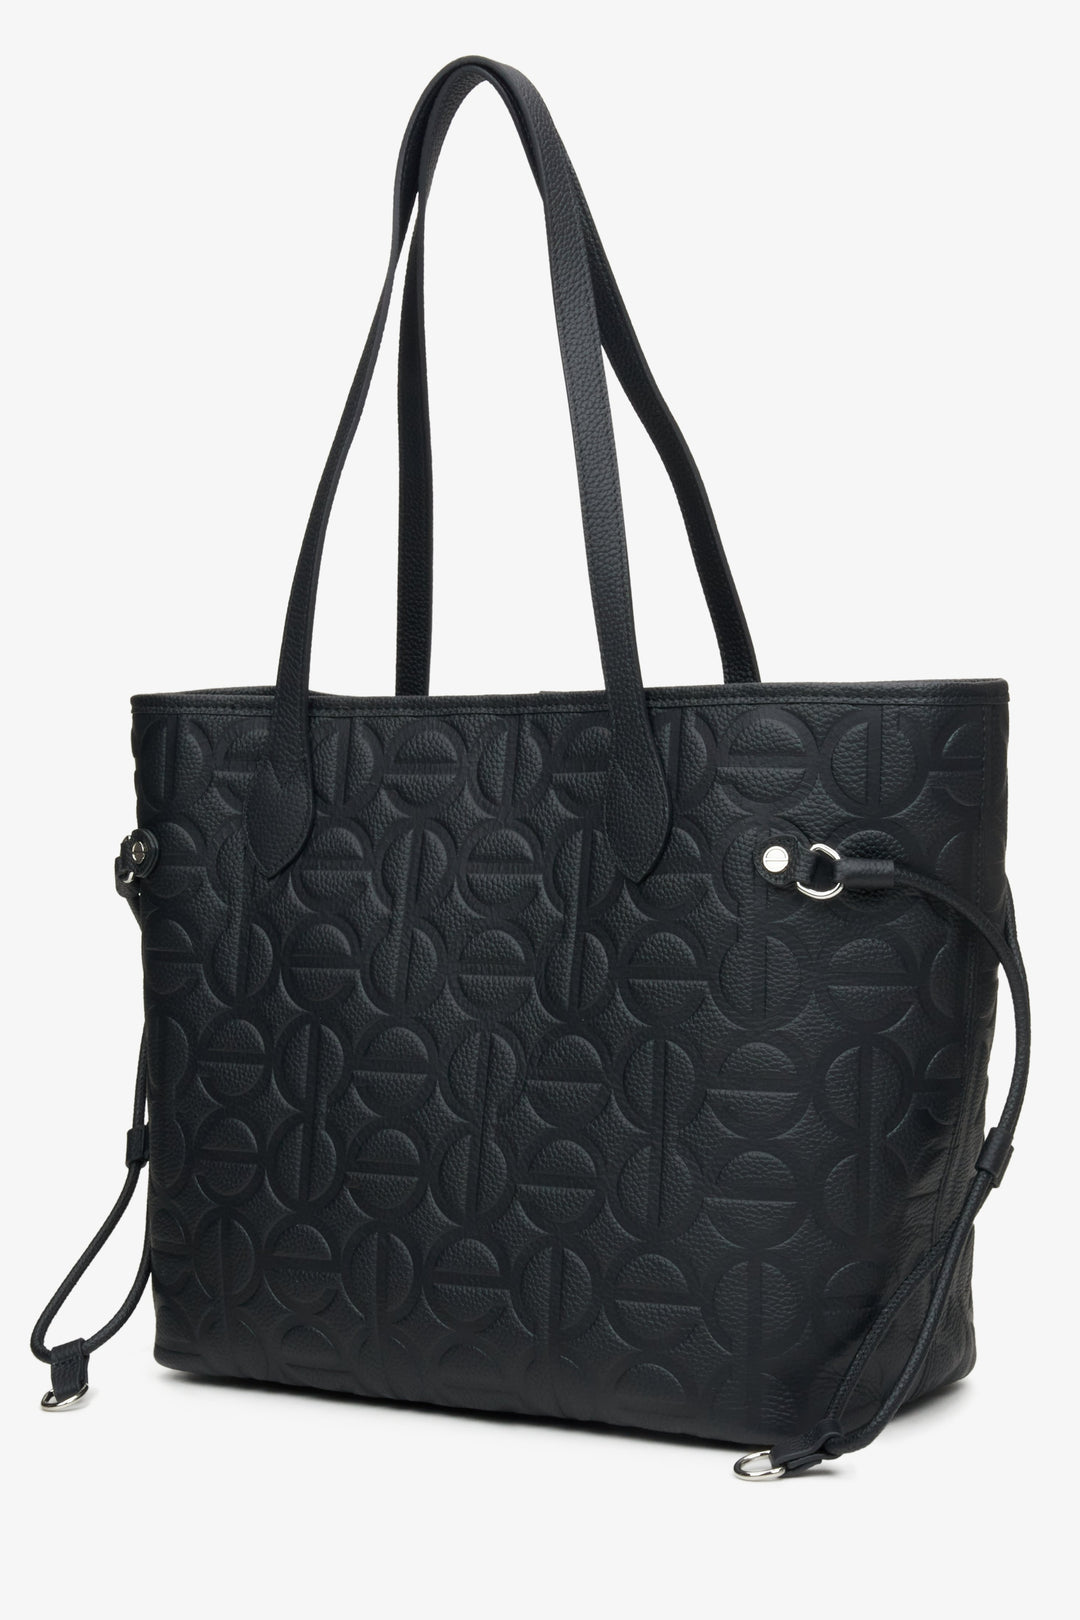 Women's black leather shopper bag - perfect for spring.